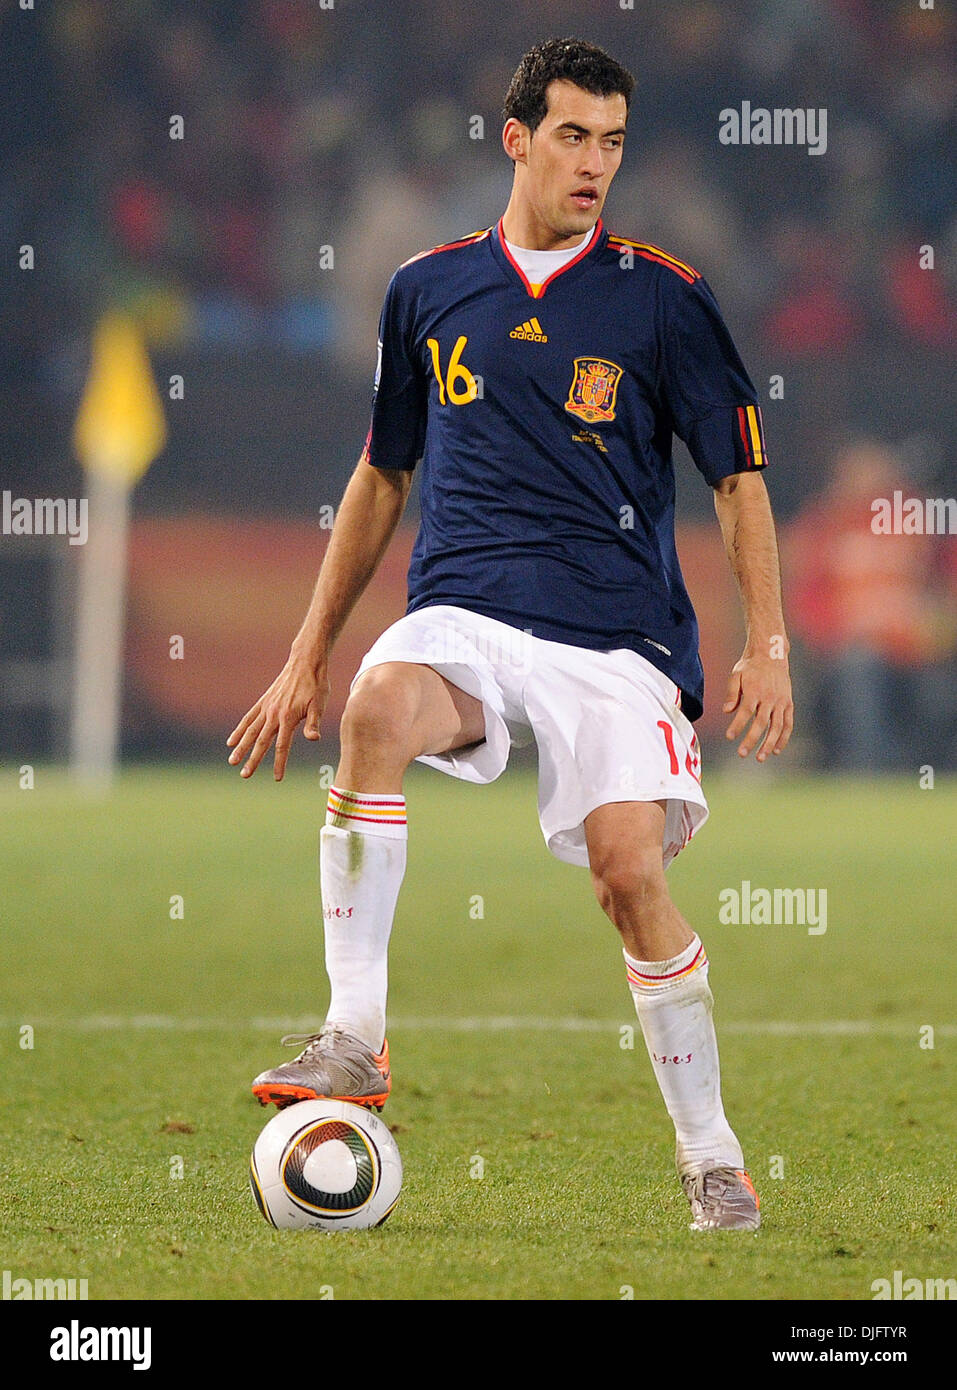 June 25, 2010 - Pretoria, South Africa - Sergio Busquets of Spain in action during the 2010 FIFA World Cup soccer match between Chile and Spain at Loftus Versfeld Stadium on June 25, 2010 in Pretoria, South Africa. (Credit Image: © Luca Ghidoni/ZUMApress.com) Stock Photo